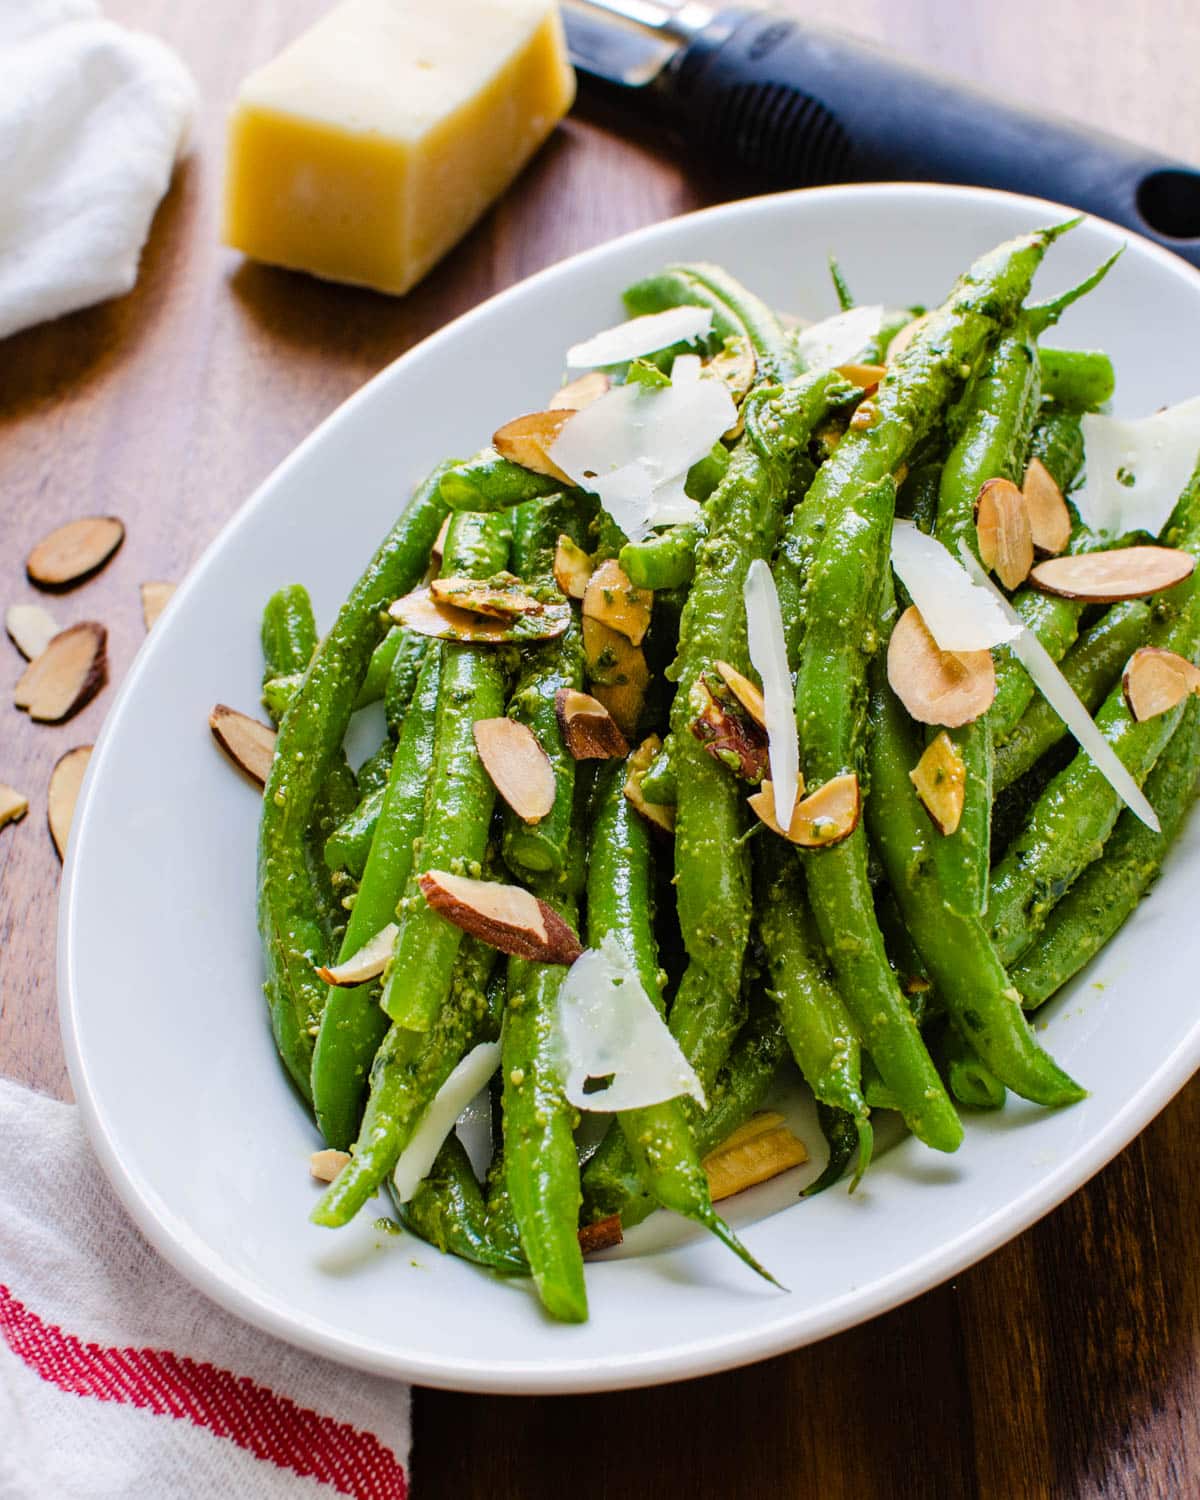 Serving Italian green beans on a plate.